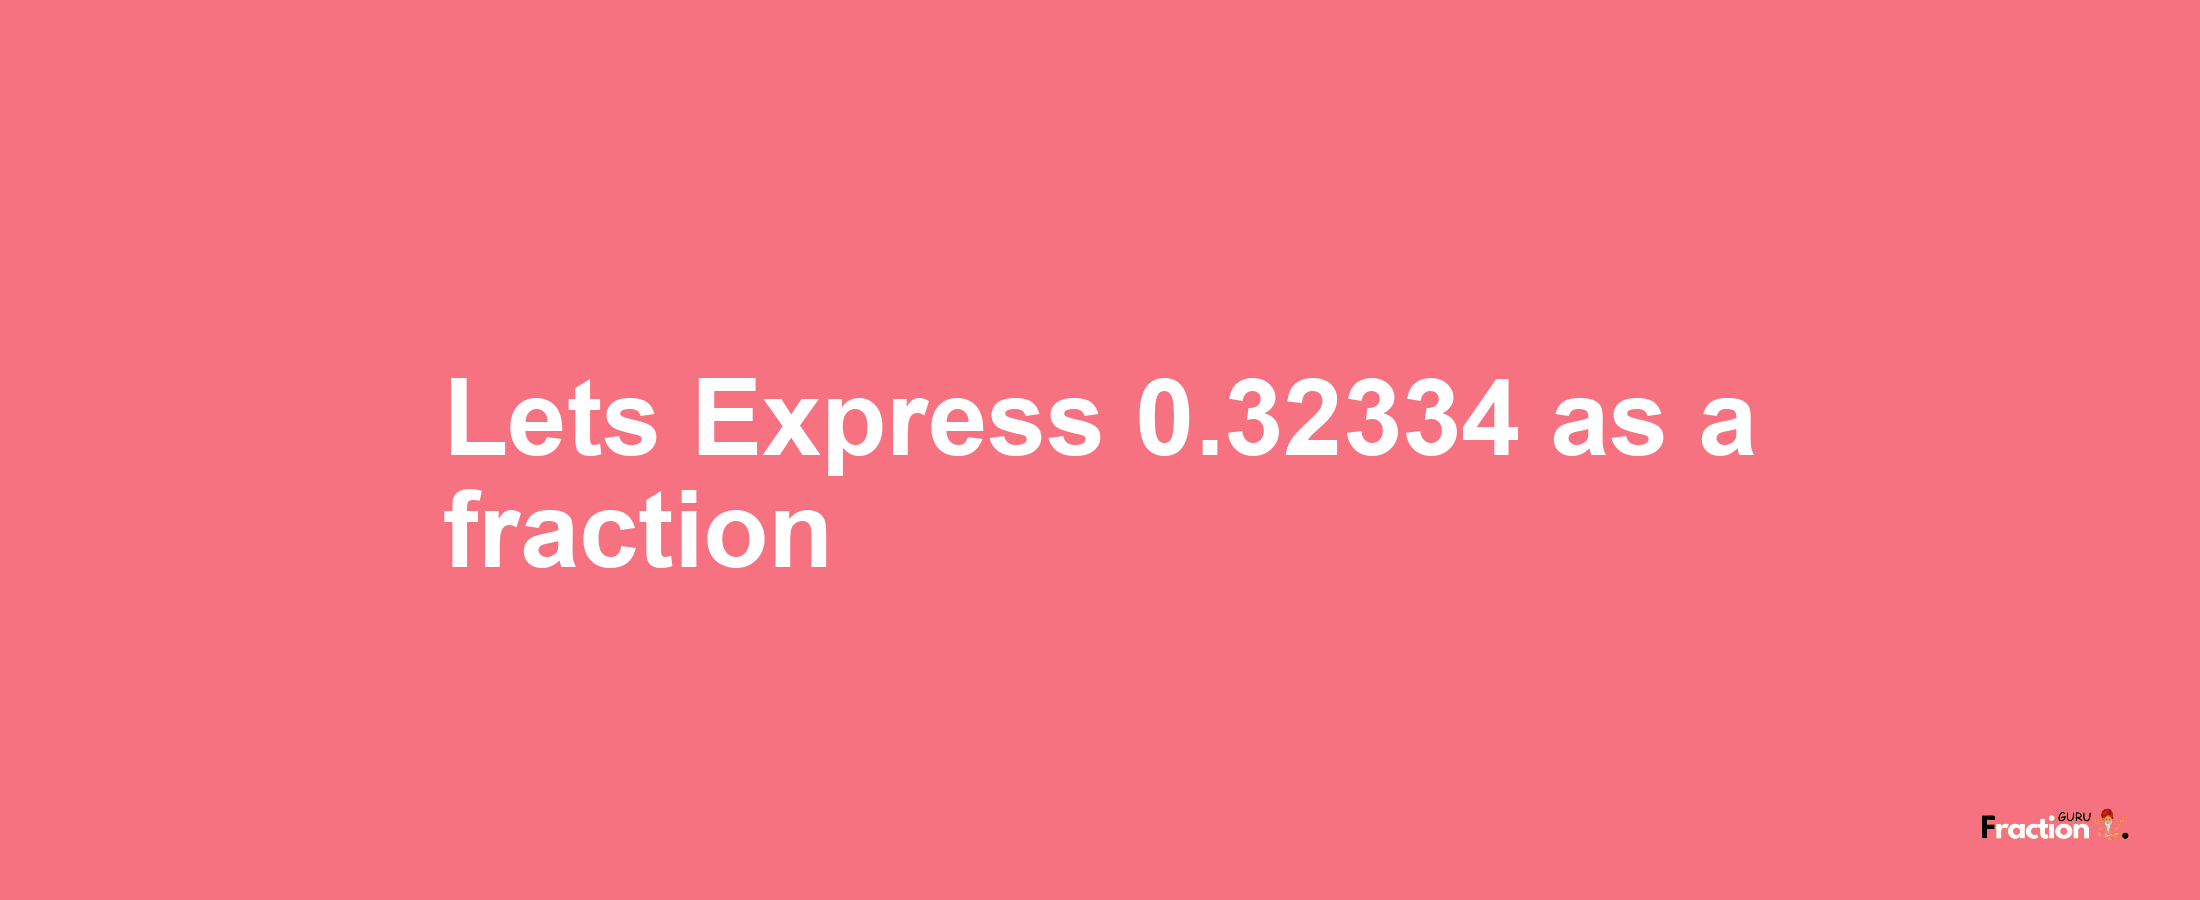 Lets Express 0.32334 as afraction